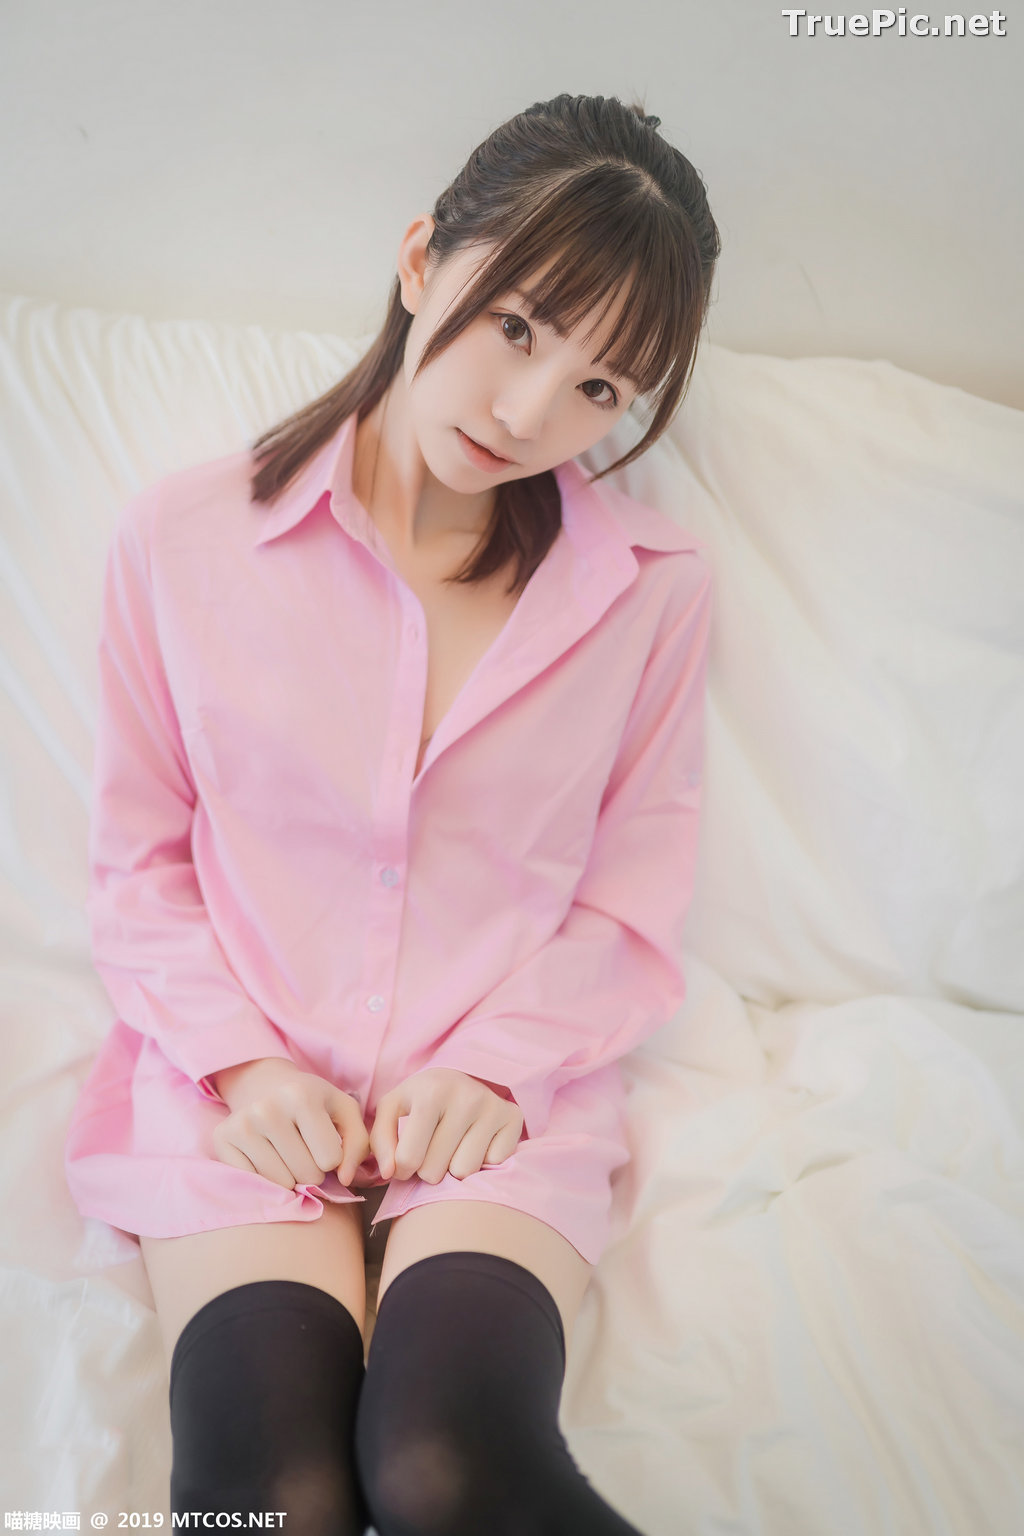 Image [MTCos] 喵糖映画 Vol.022 – Chinese Model – Pink Shirt and Black Stockings - TruePic.net - Picture-14